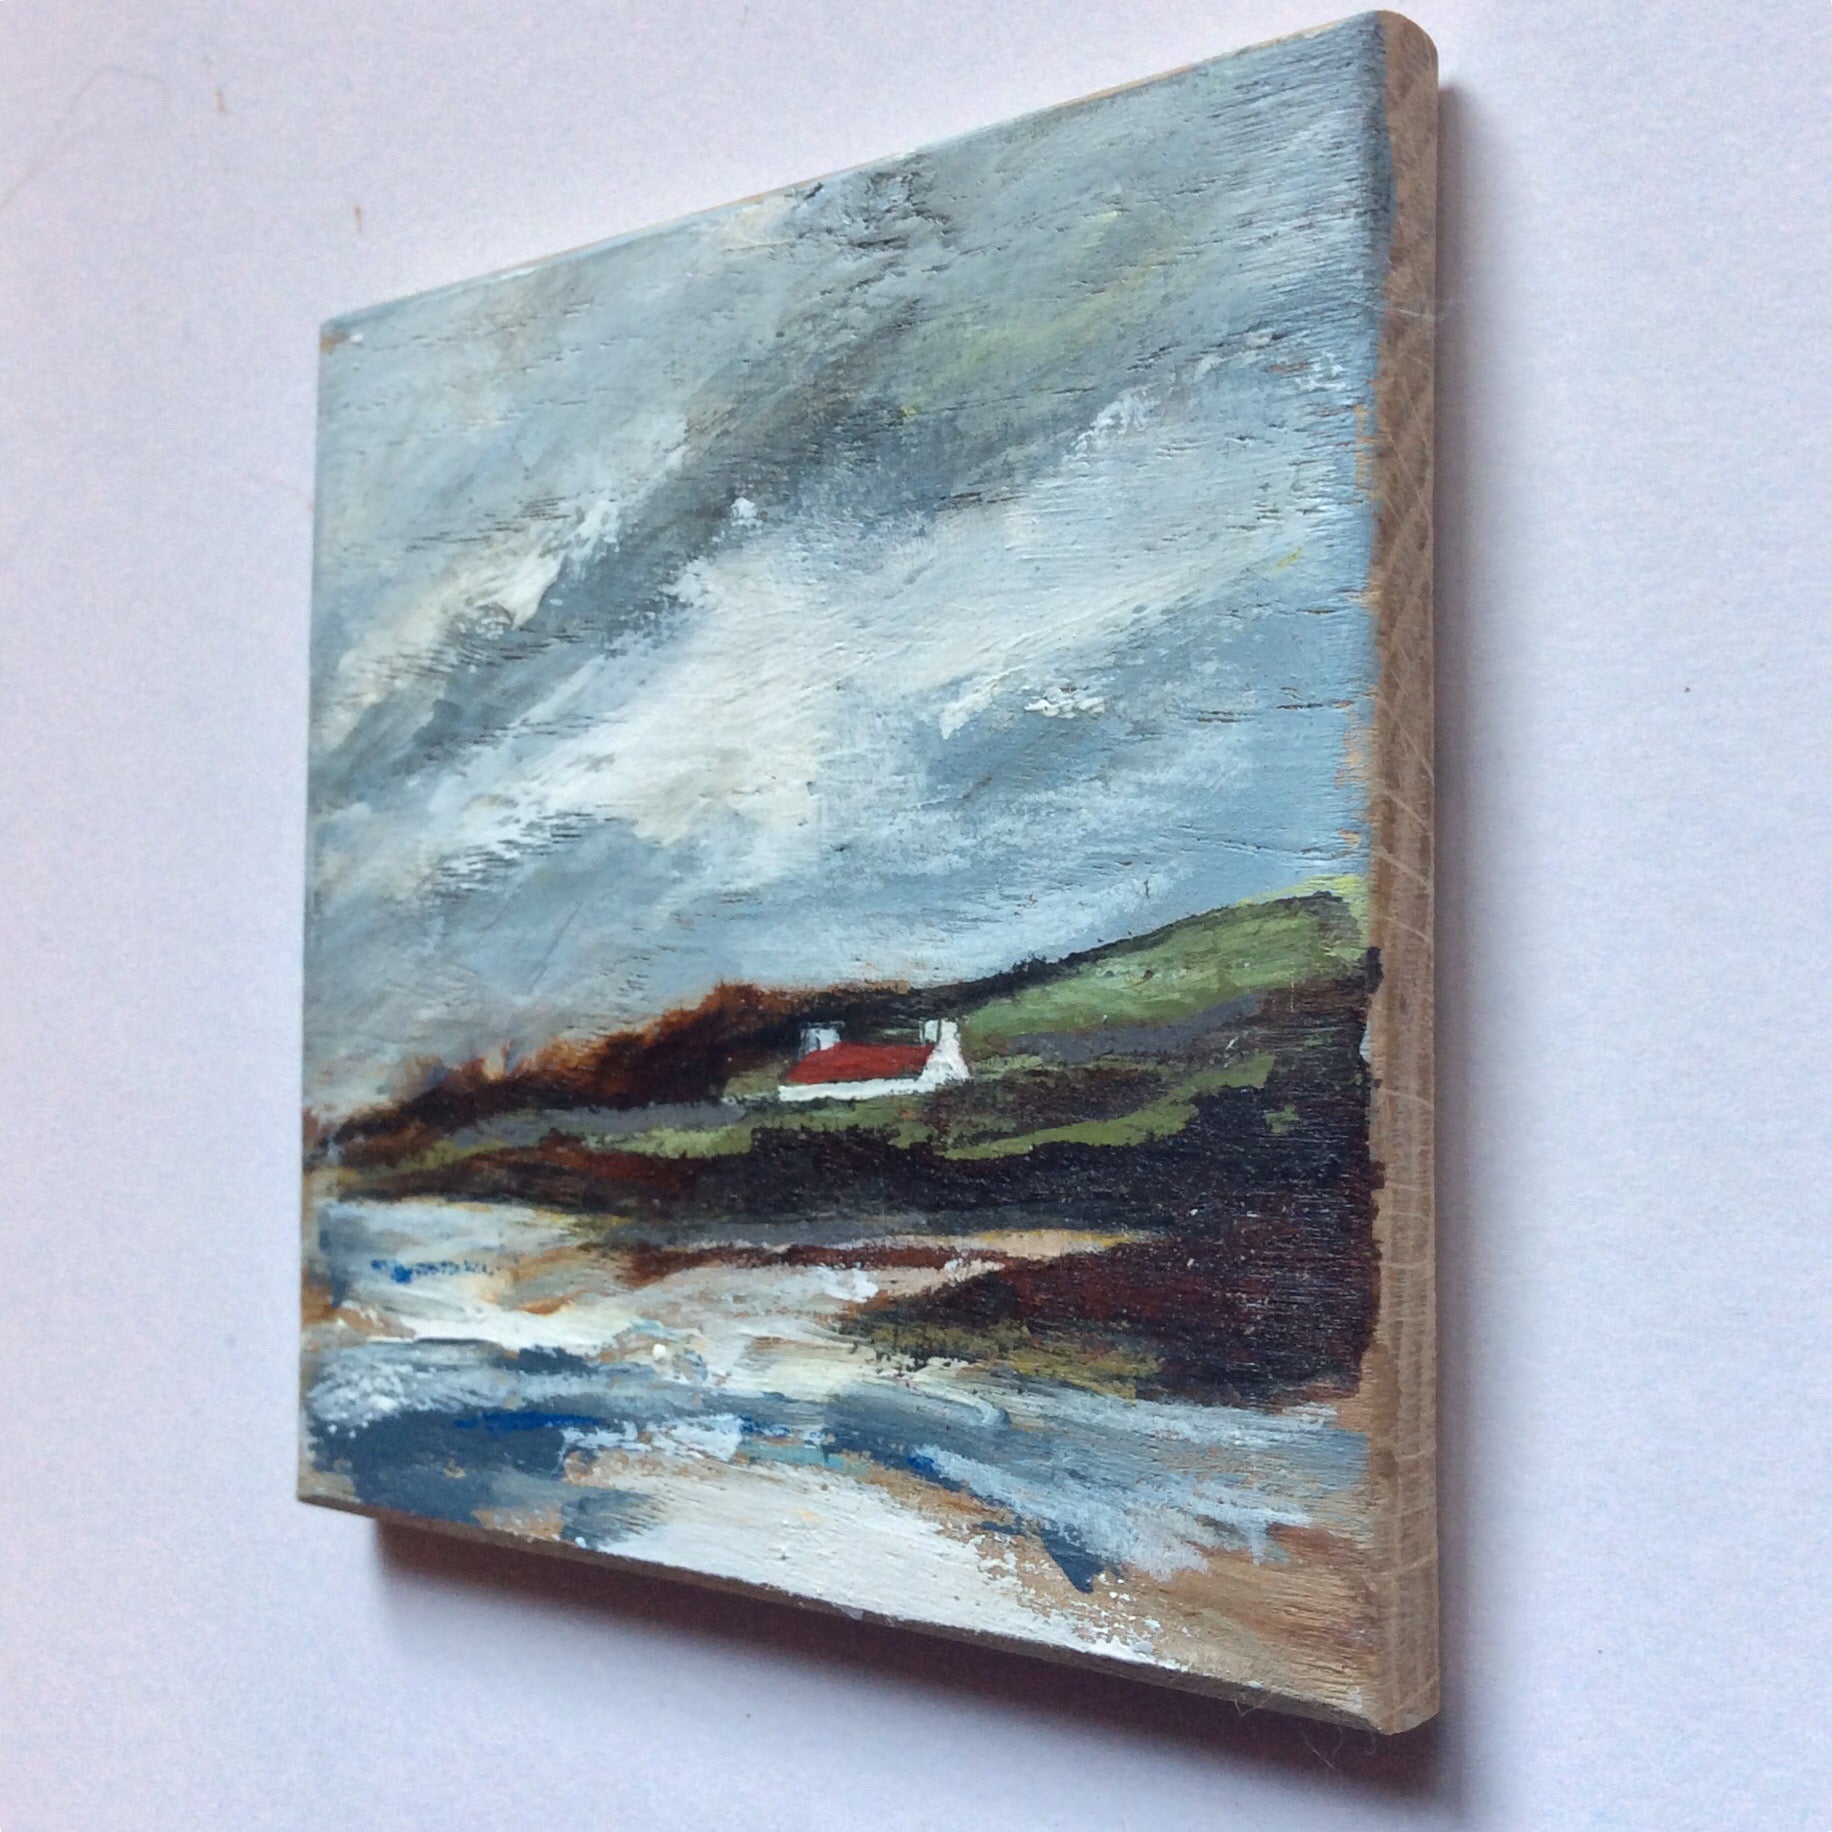 Mixed Media Art on wood By Louise O'Hara - "Looking out to sea”